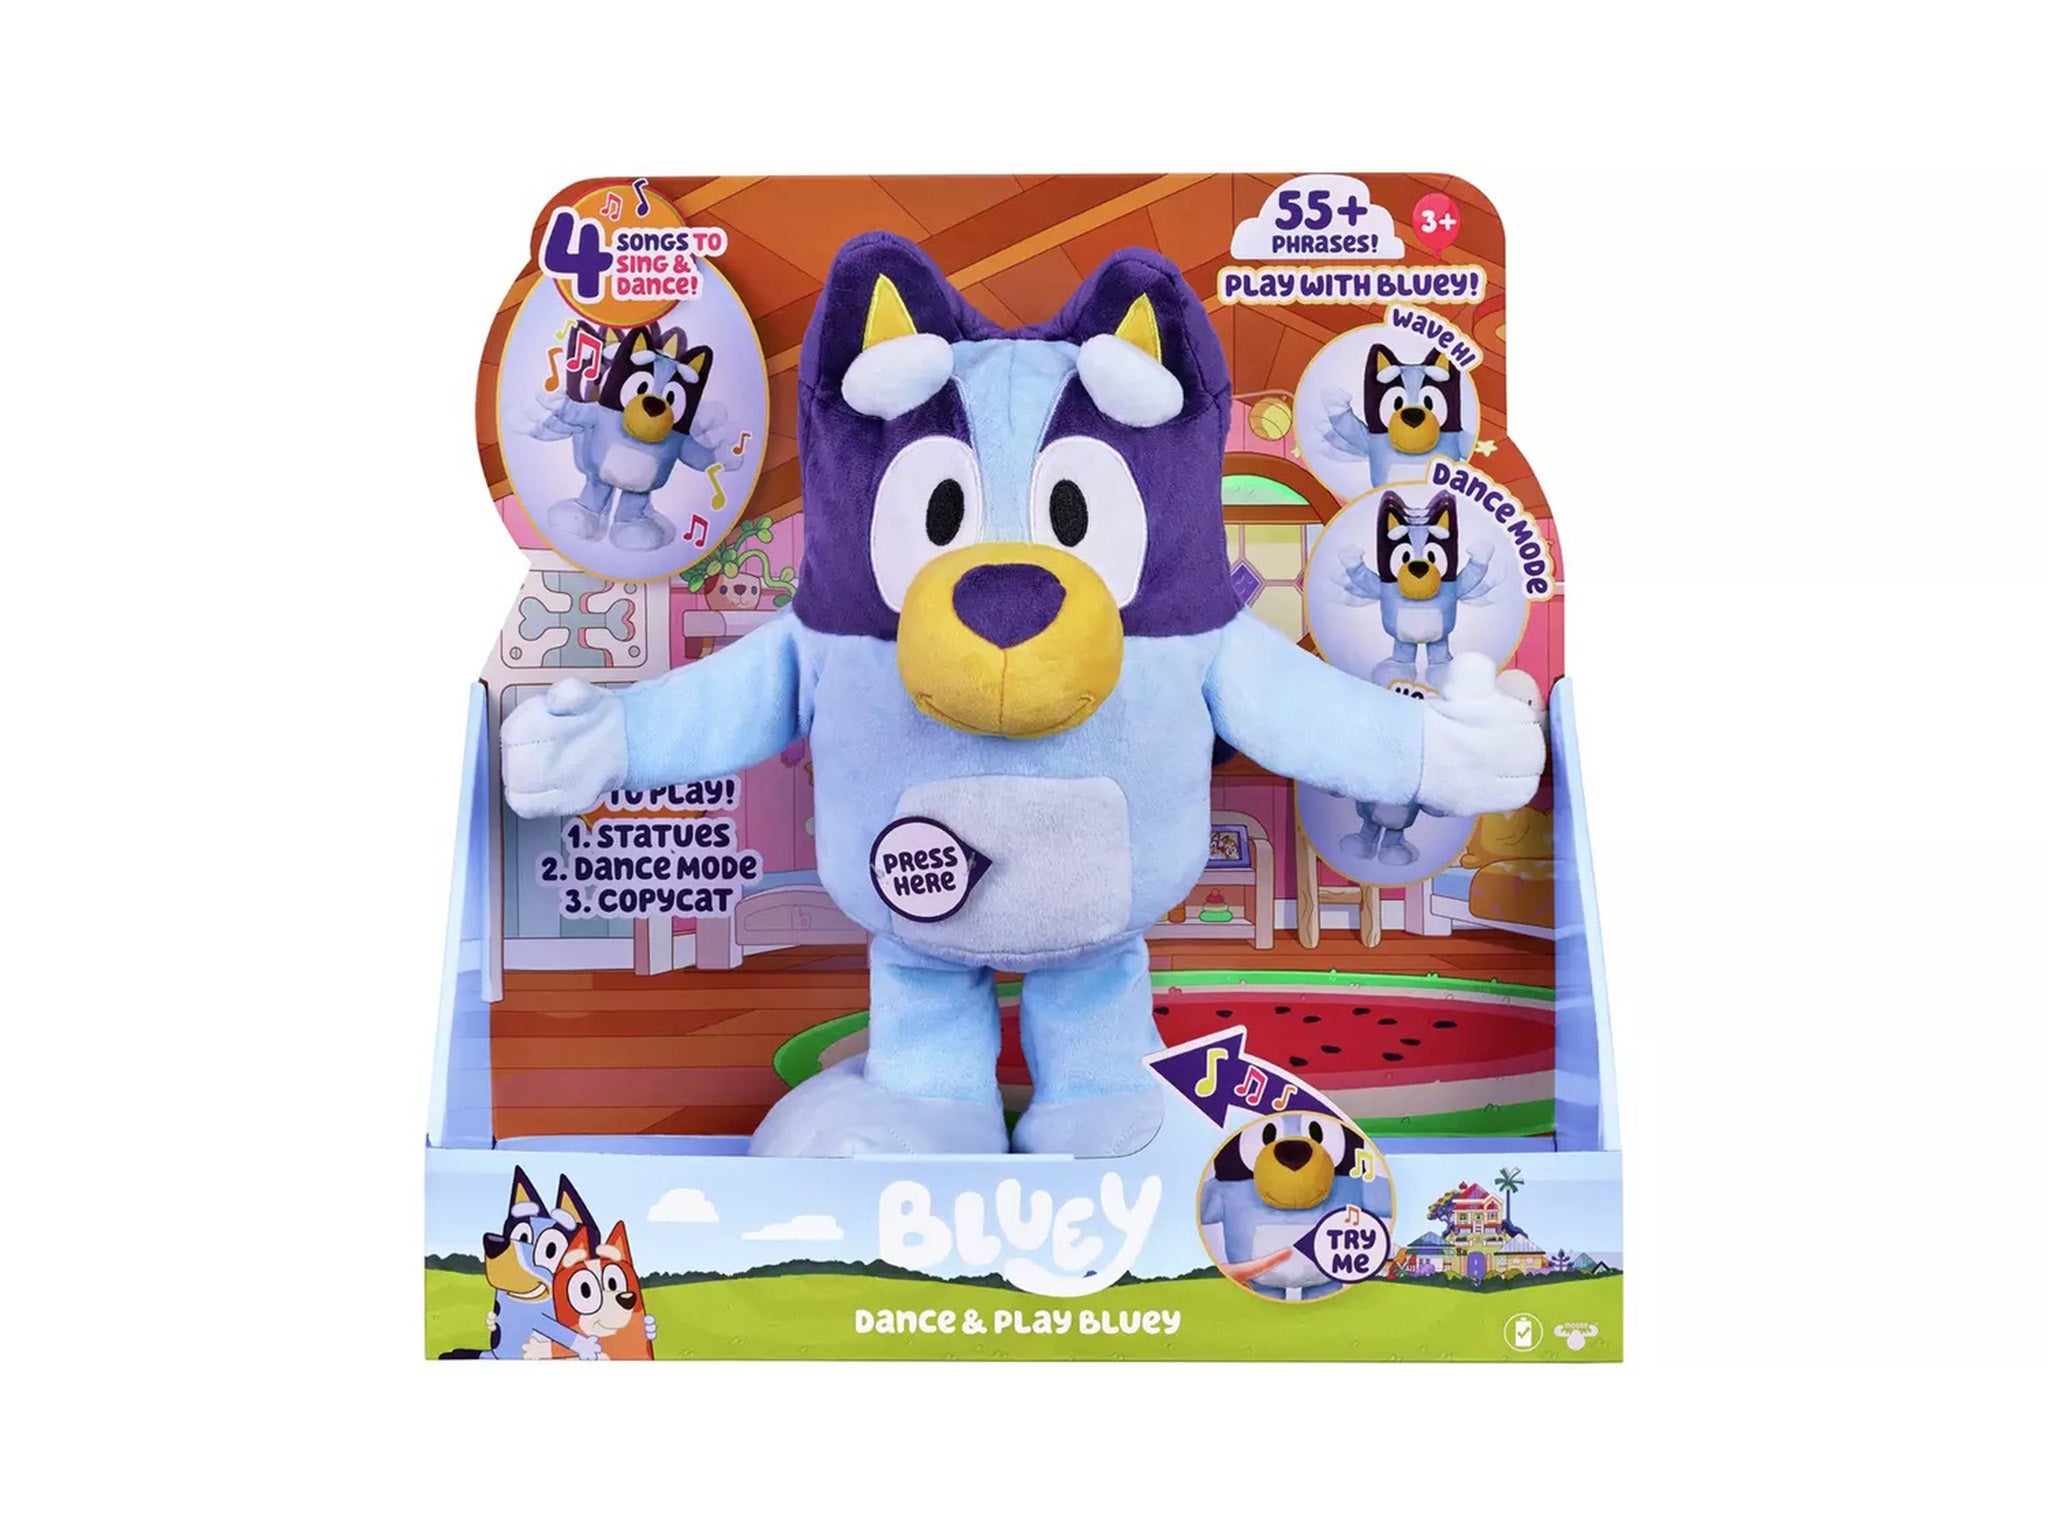 Bluey dance and play plush toy